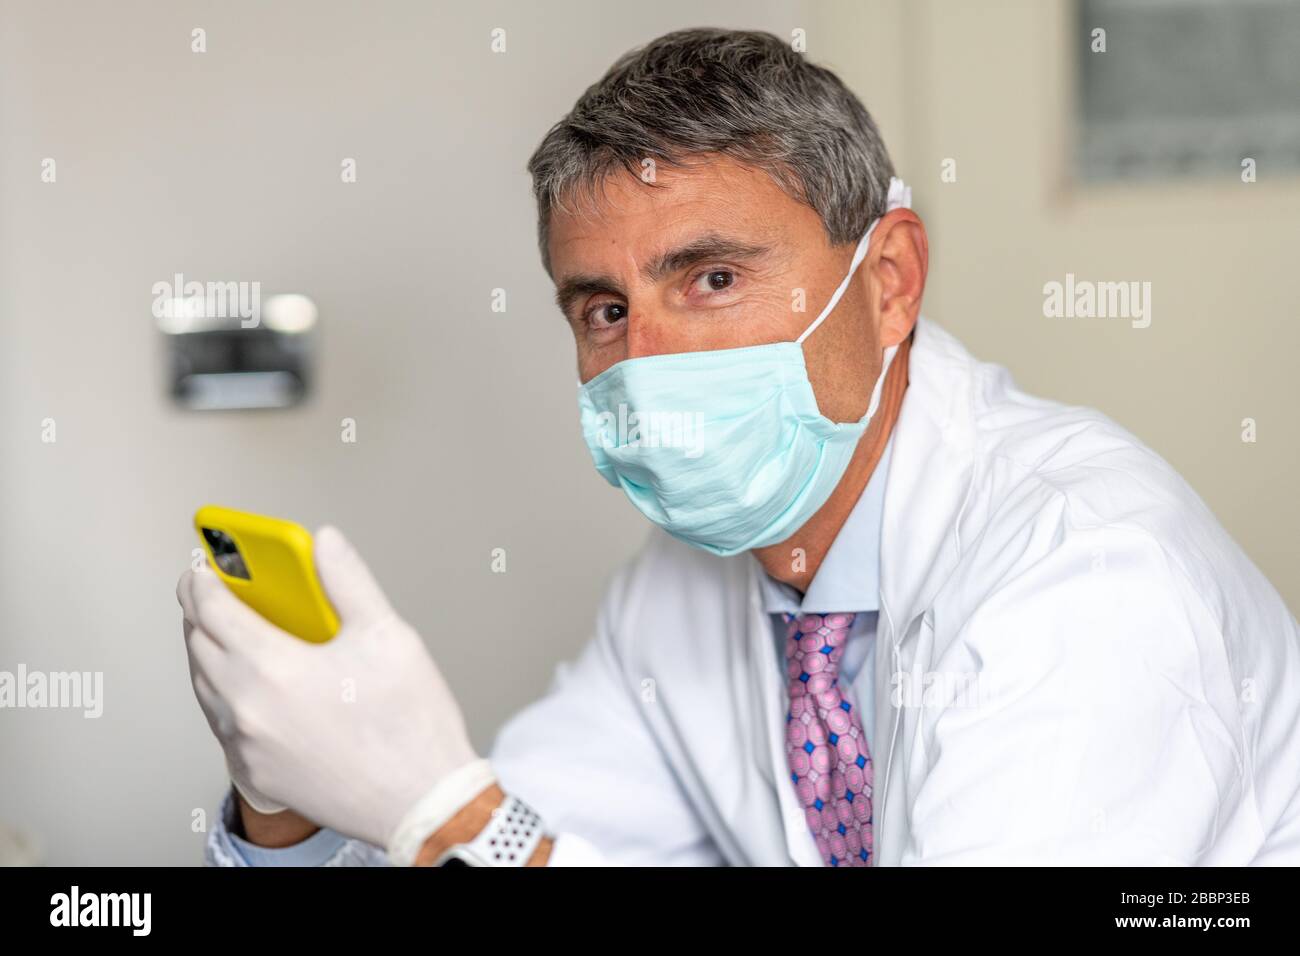 Confident doctor wearing mask and gloves at the medical studio in coronavirus times, cleaning his smartphone. Stock Photo